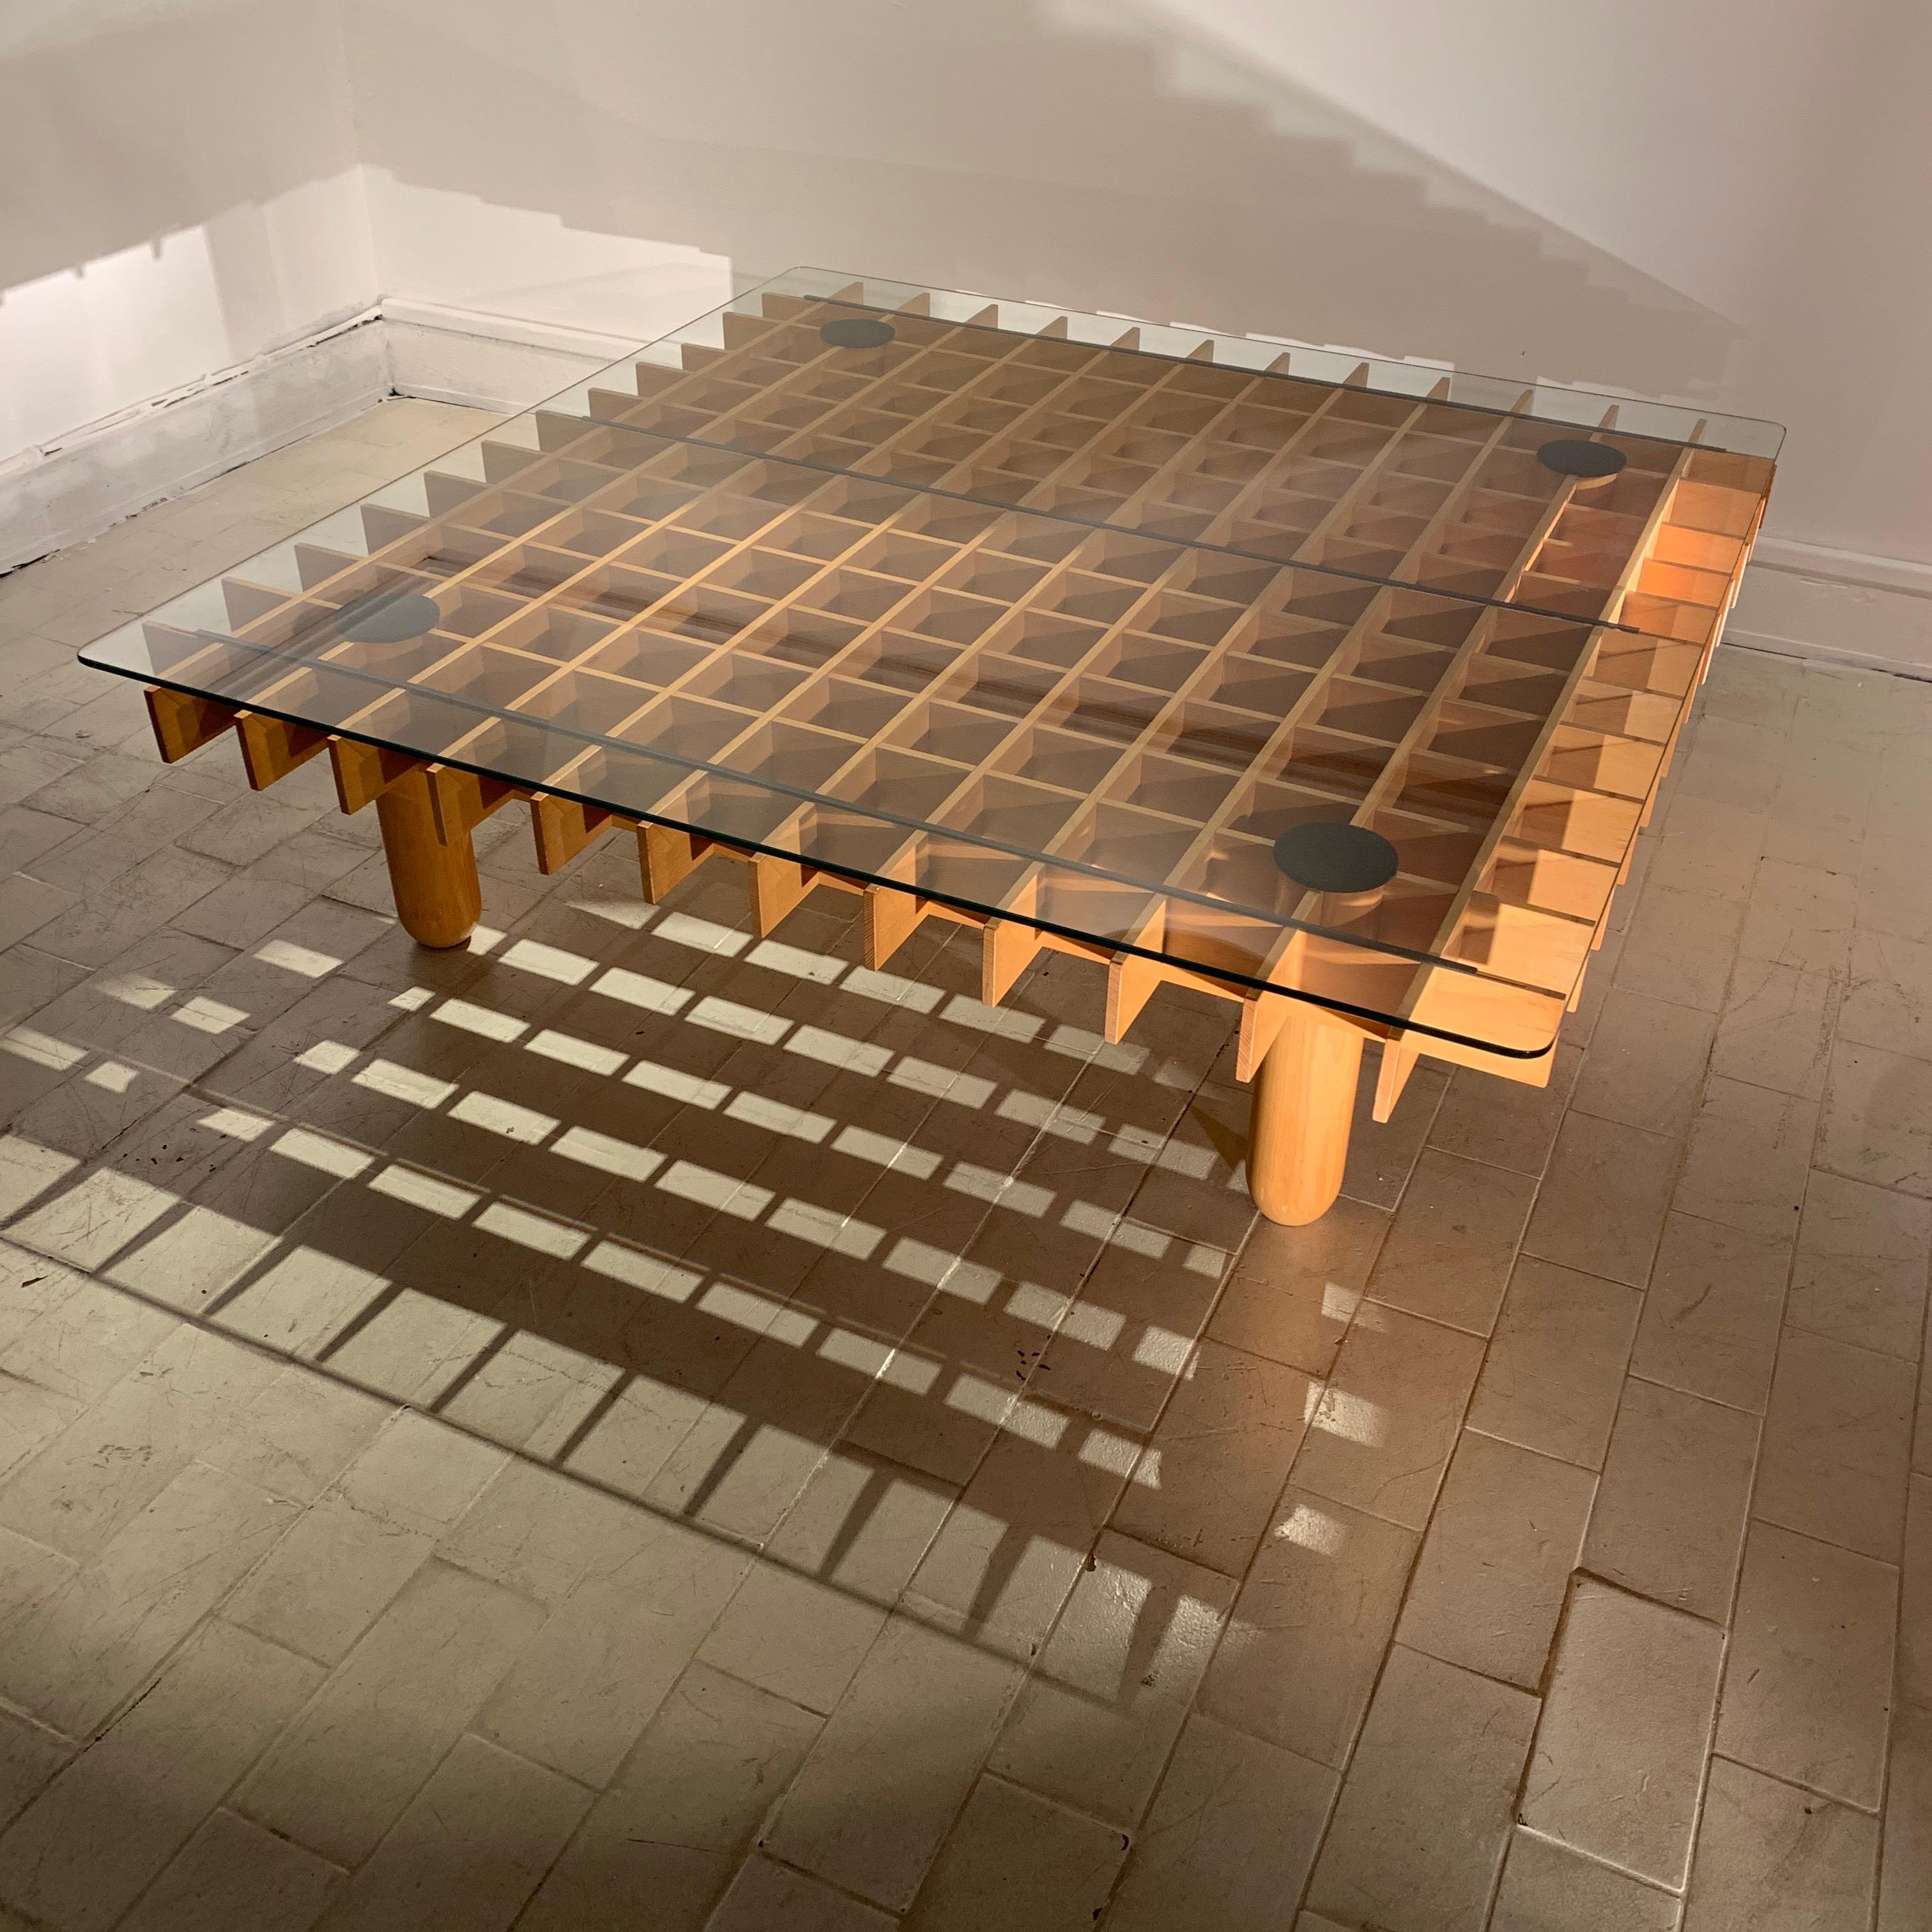 The table dates circa 1970s. This type of table is in the style of Gianfranco Frattini Kyoto table series. Common is the small square or rectangular model. This one is the large square one, which gives quite a presence as a coffee table, with a